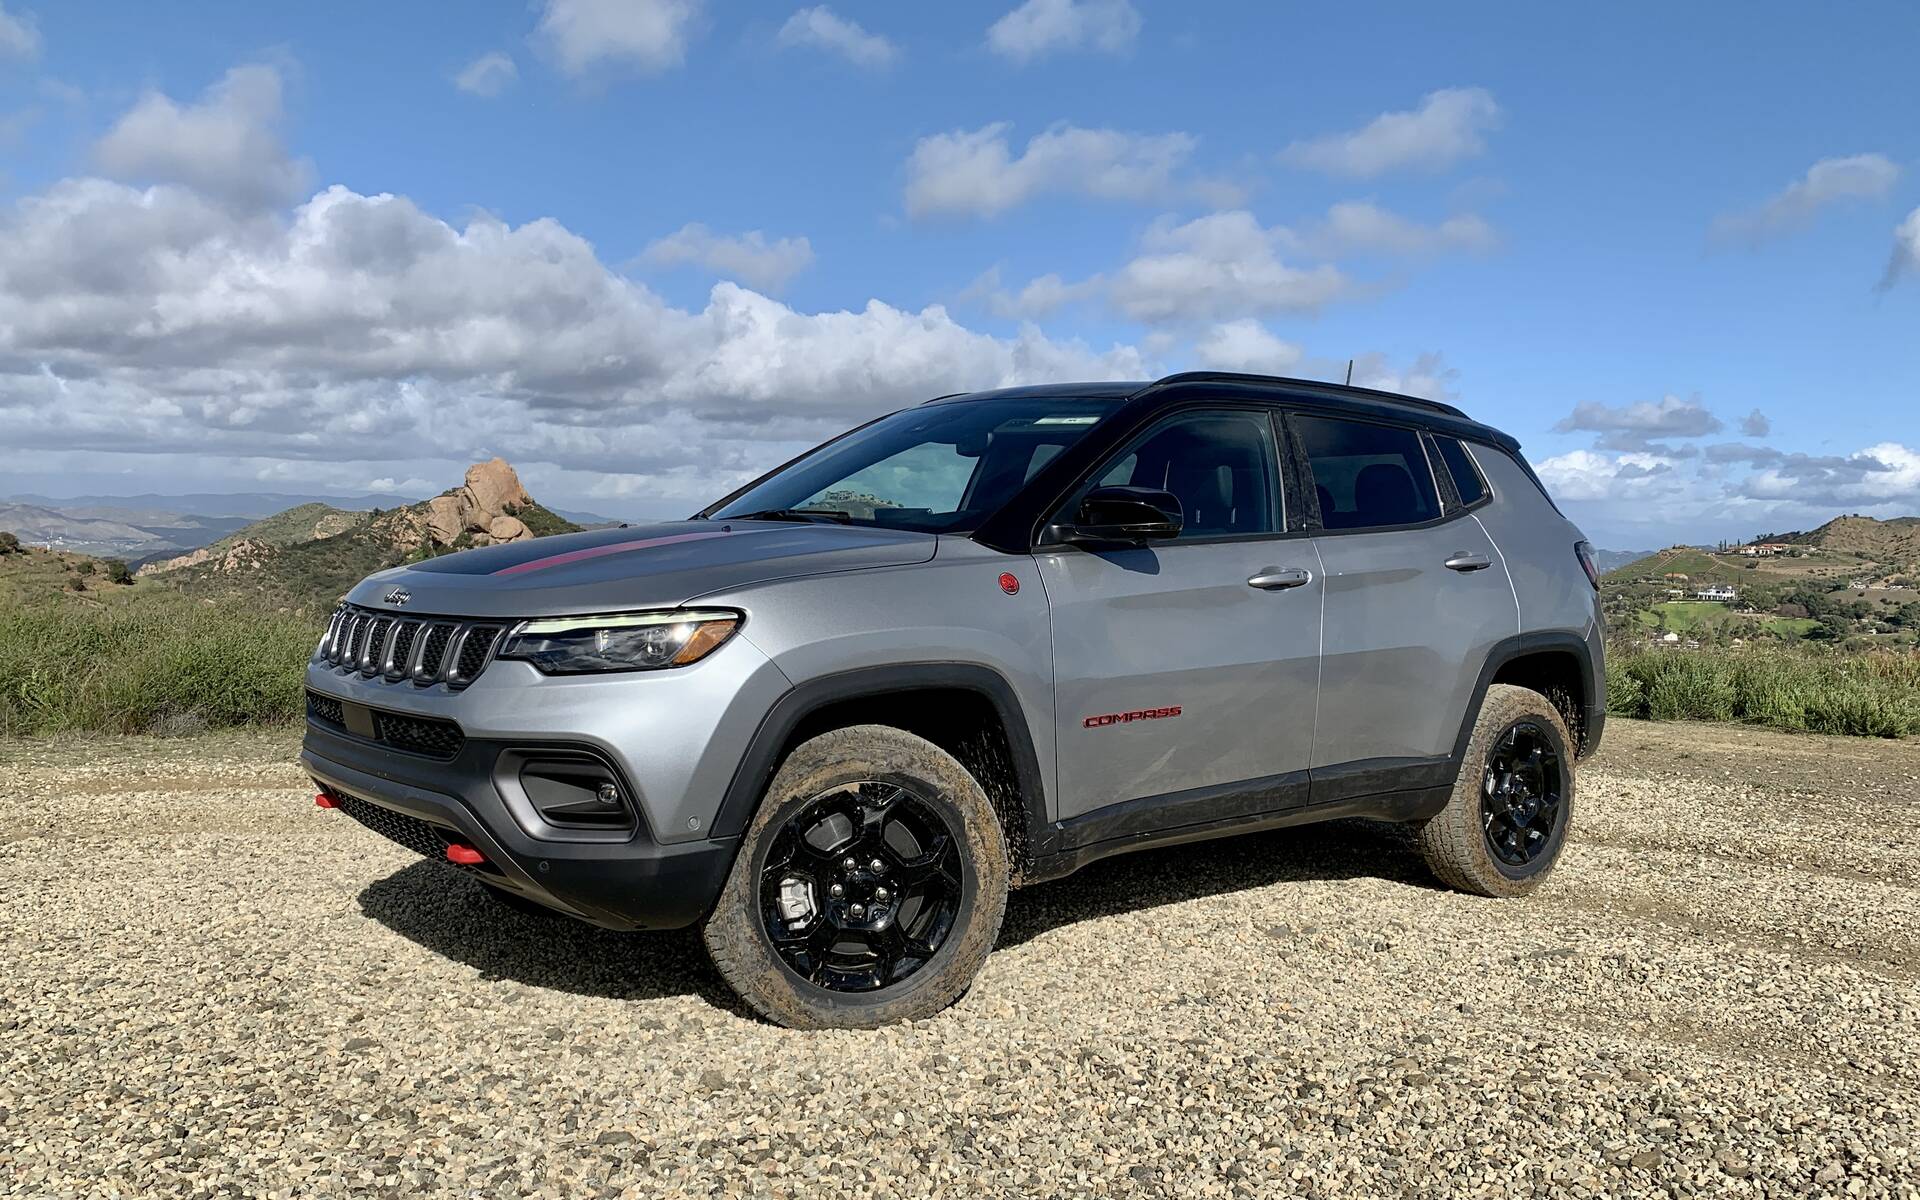 2023 Jeep Compass: So Many Better Options Out There - The Car Guide